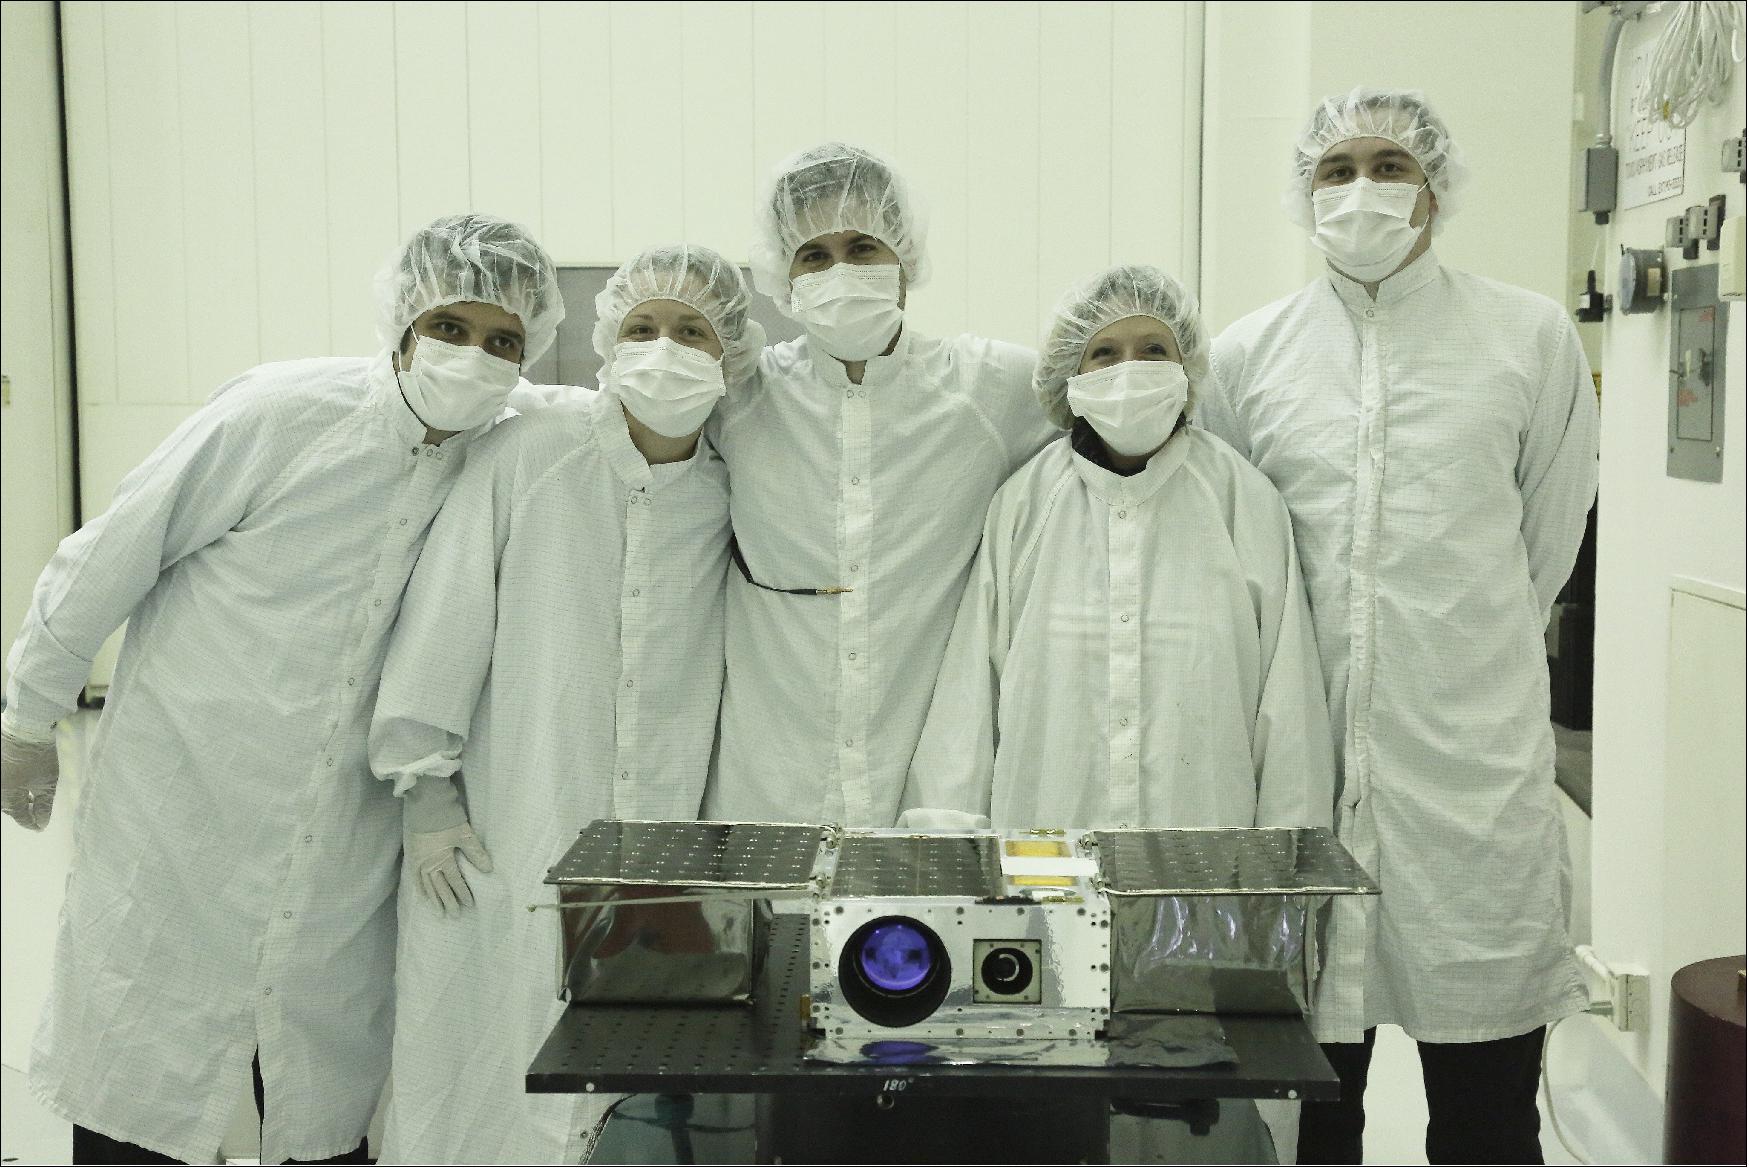 Figure 7: Members of the ASTERIA team prepare the petite satellite for its journey to space (from left to right: Robert Bocchino, Amanda Donner, Cody Colley, Alessandra Babuscia, and Peter Di Pasquale), image credit: NASA/JPL-Caltech)